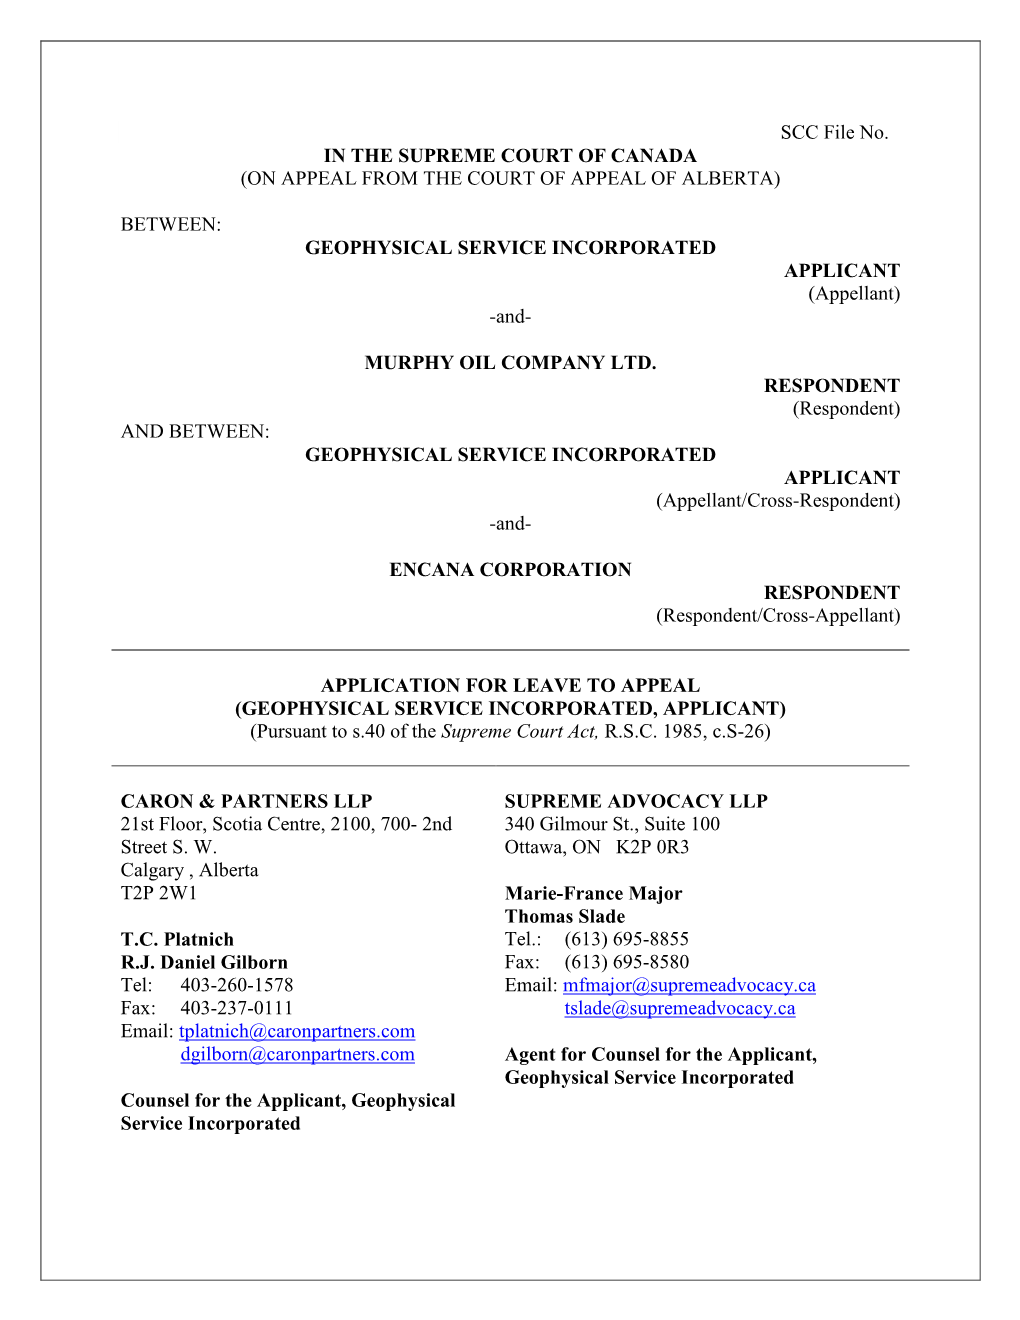 SCC File No. in the SUPREME COURT of CANADA (ON APPEAL from the COURT of APPEAL of ALBERTA)